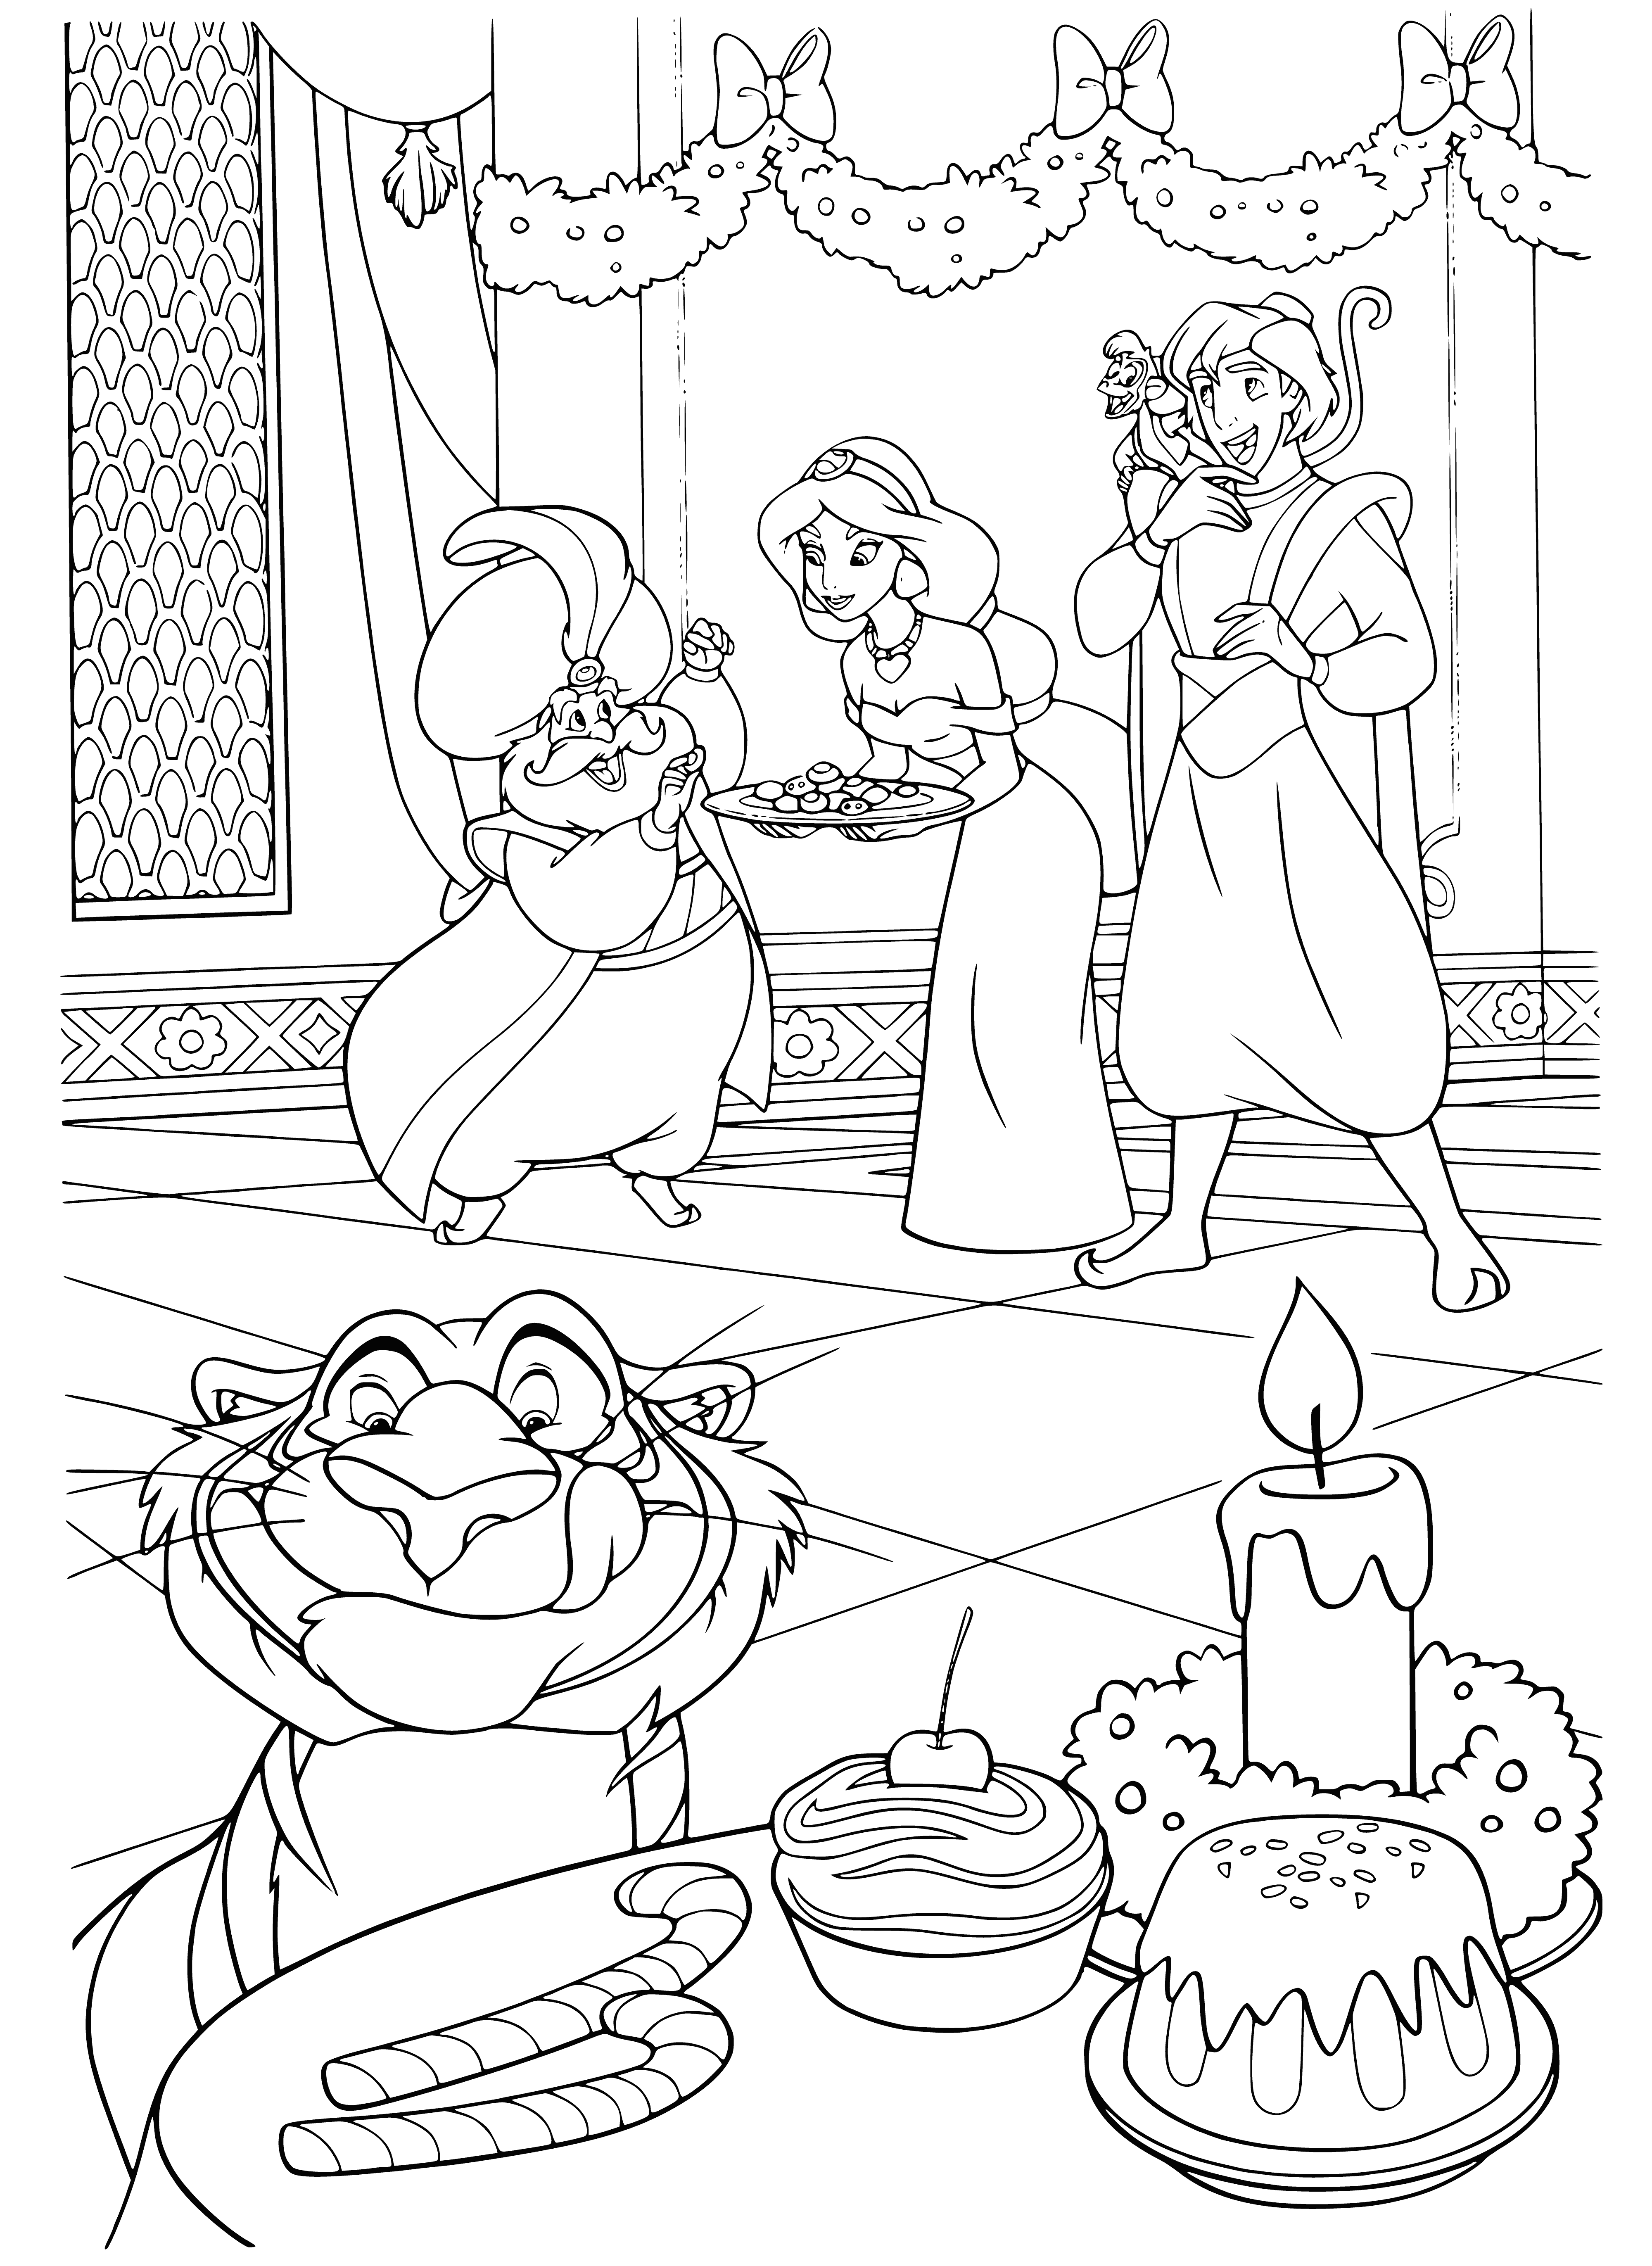 New year in the palace coloring page